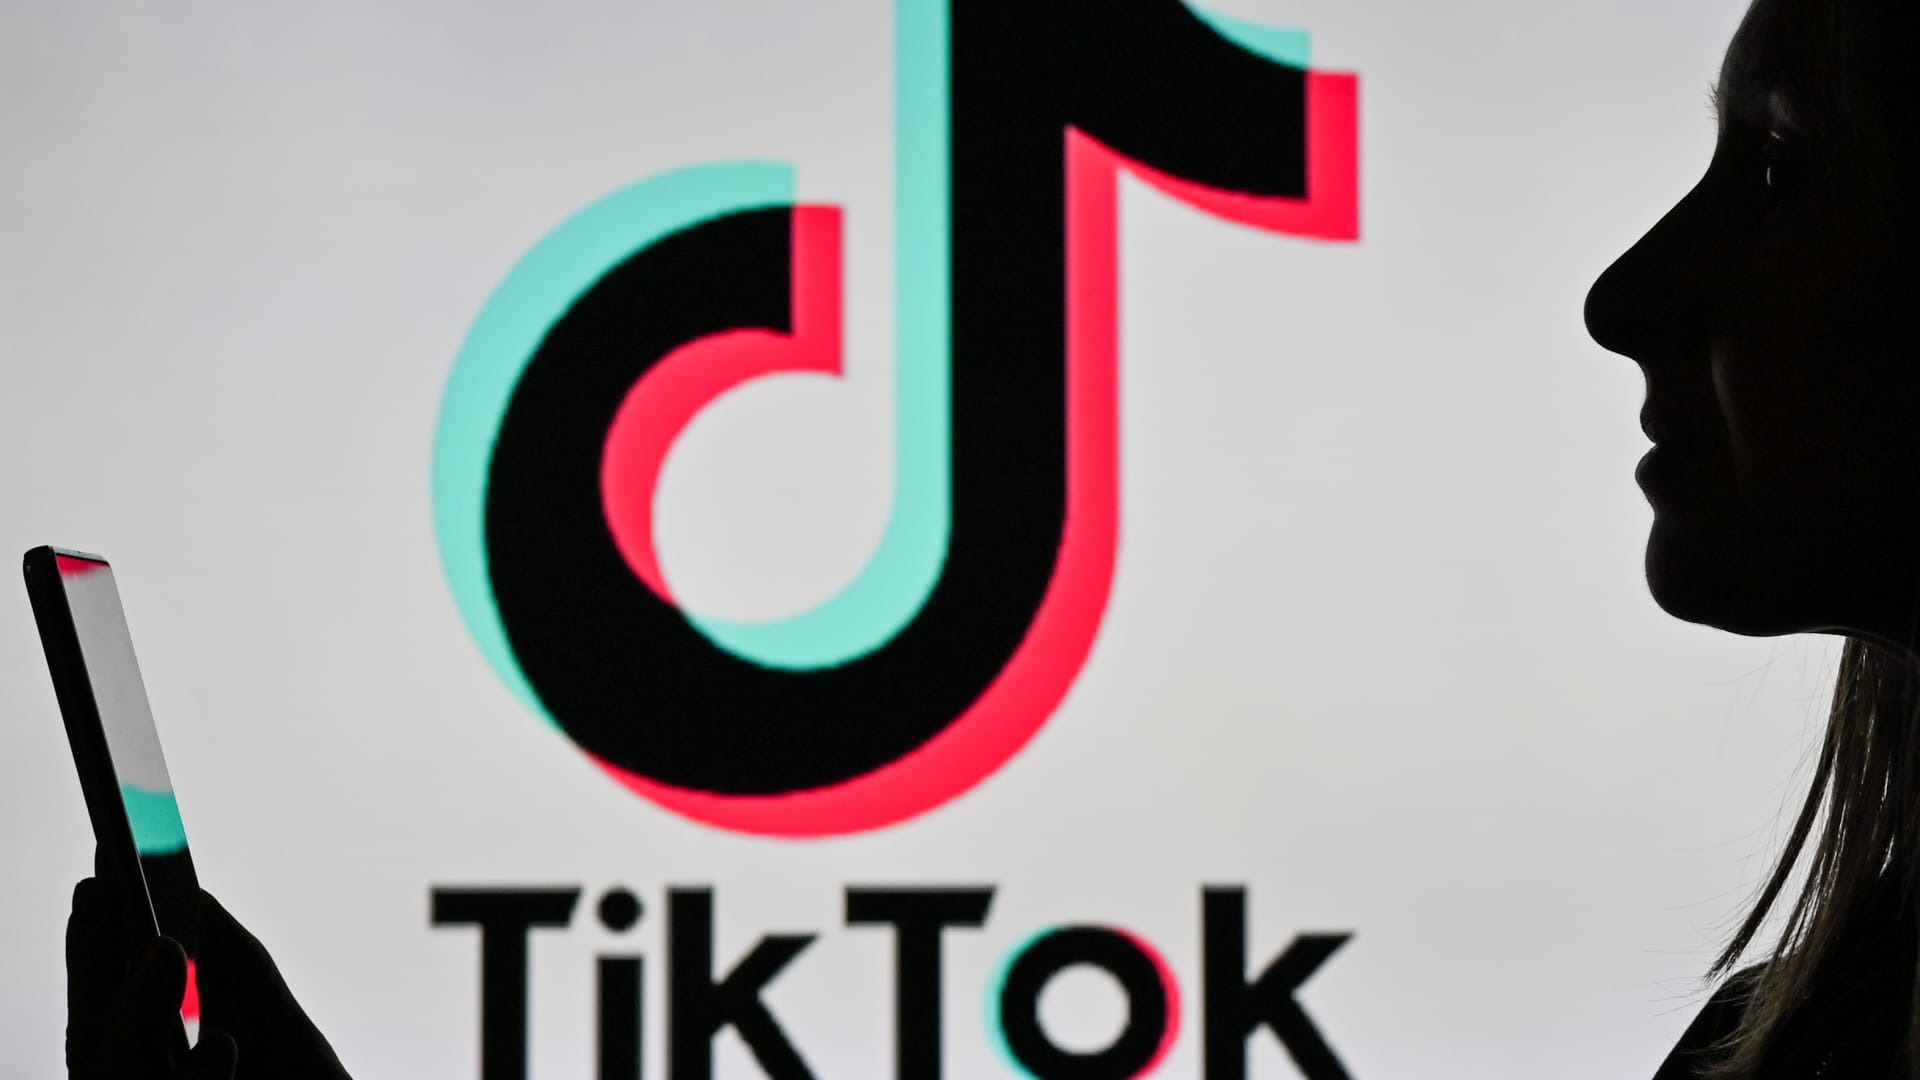 While ByteDance is best known for its viral social media app TikTok, the Beijing-based company is now bolstering its ability in semiconductor design. ByteDance won't be manufacturing chips to sell to others, but it will be designing semiconductors that it requires for specific applications internally.